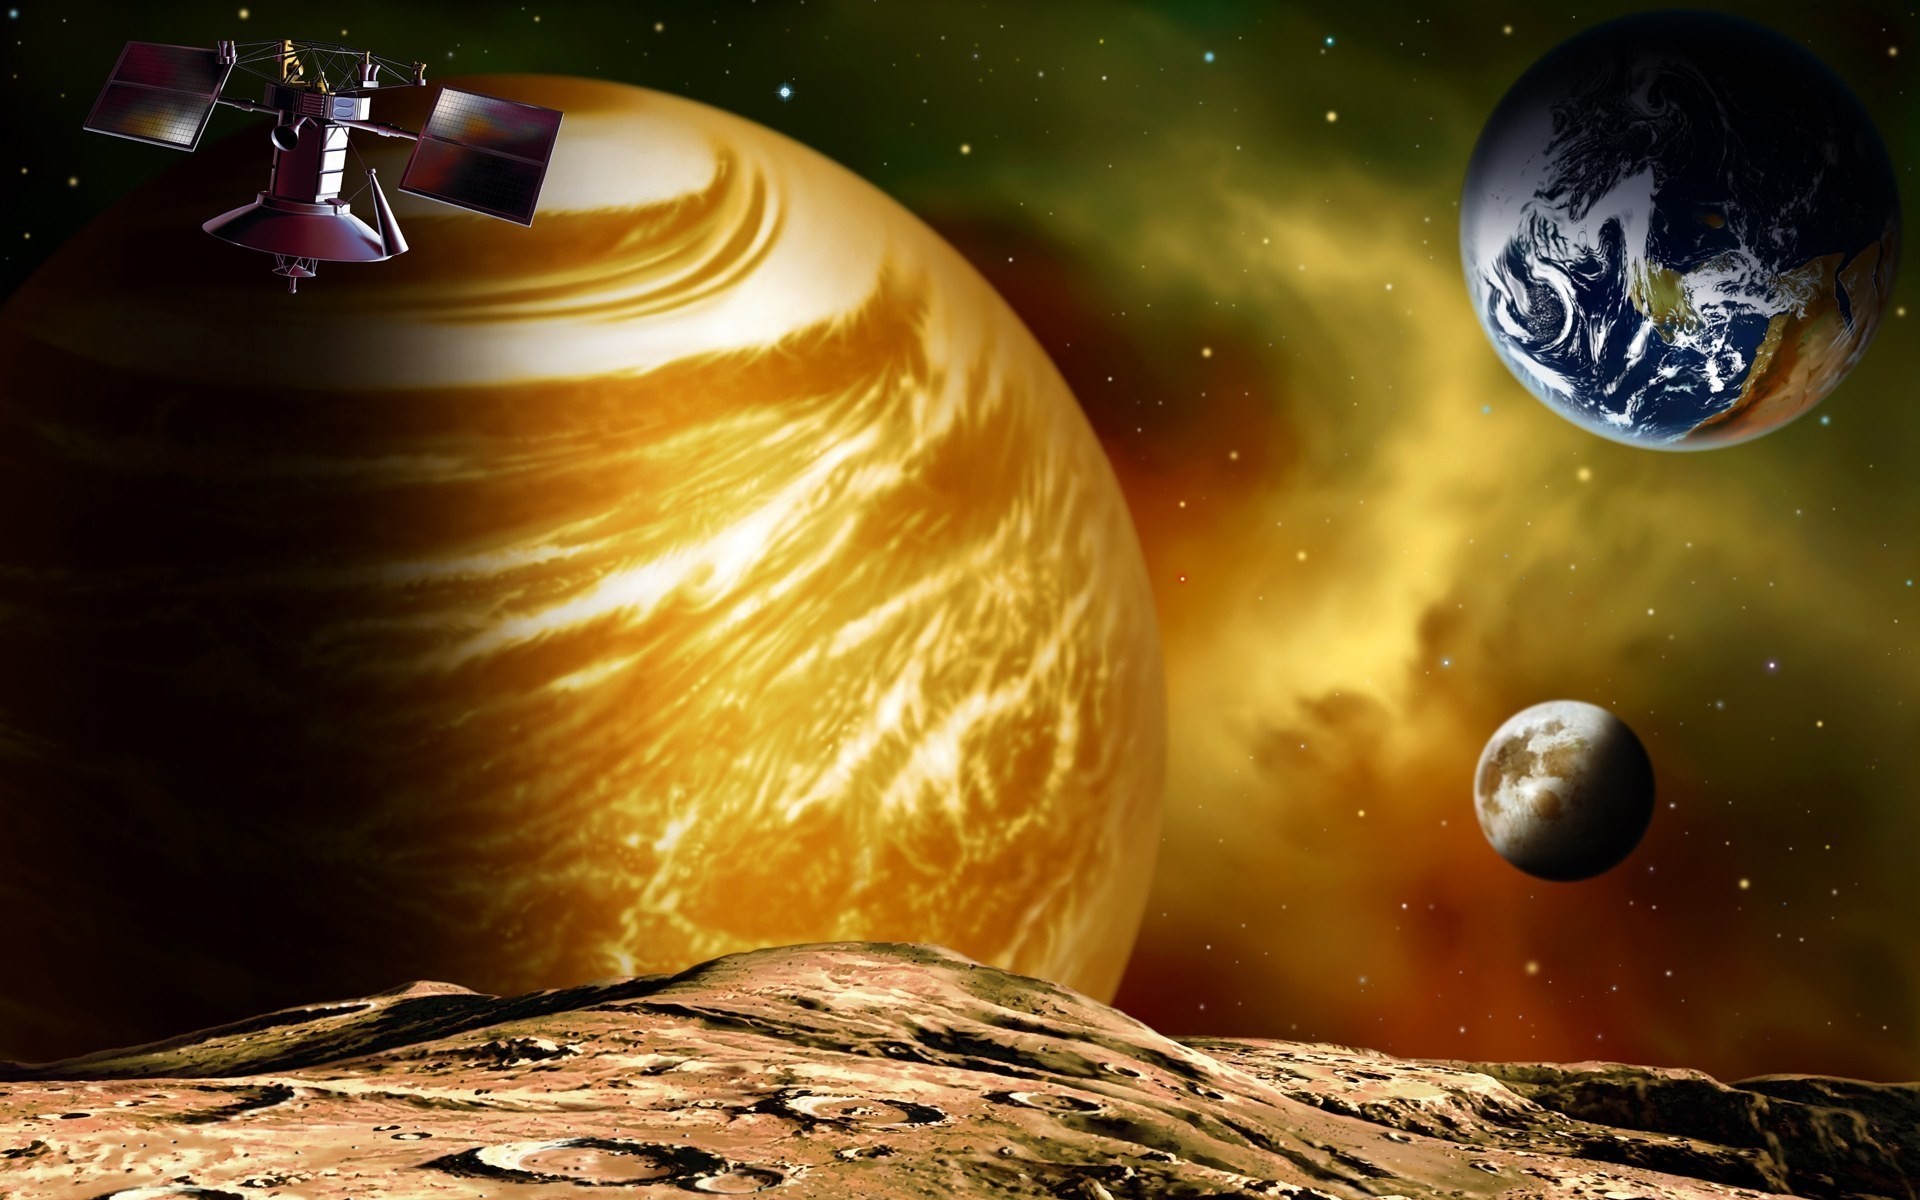 space planet astronomy moon sphere ball-shaped desktop science planets landscape